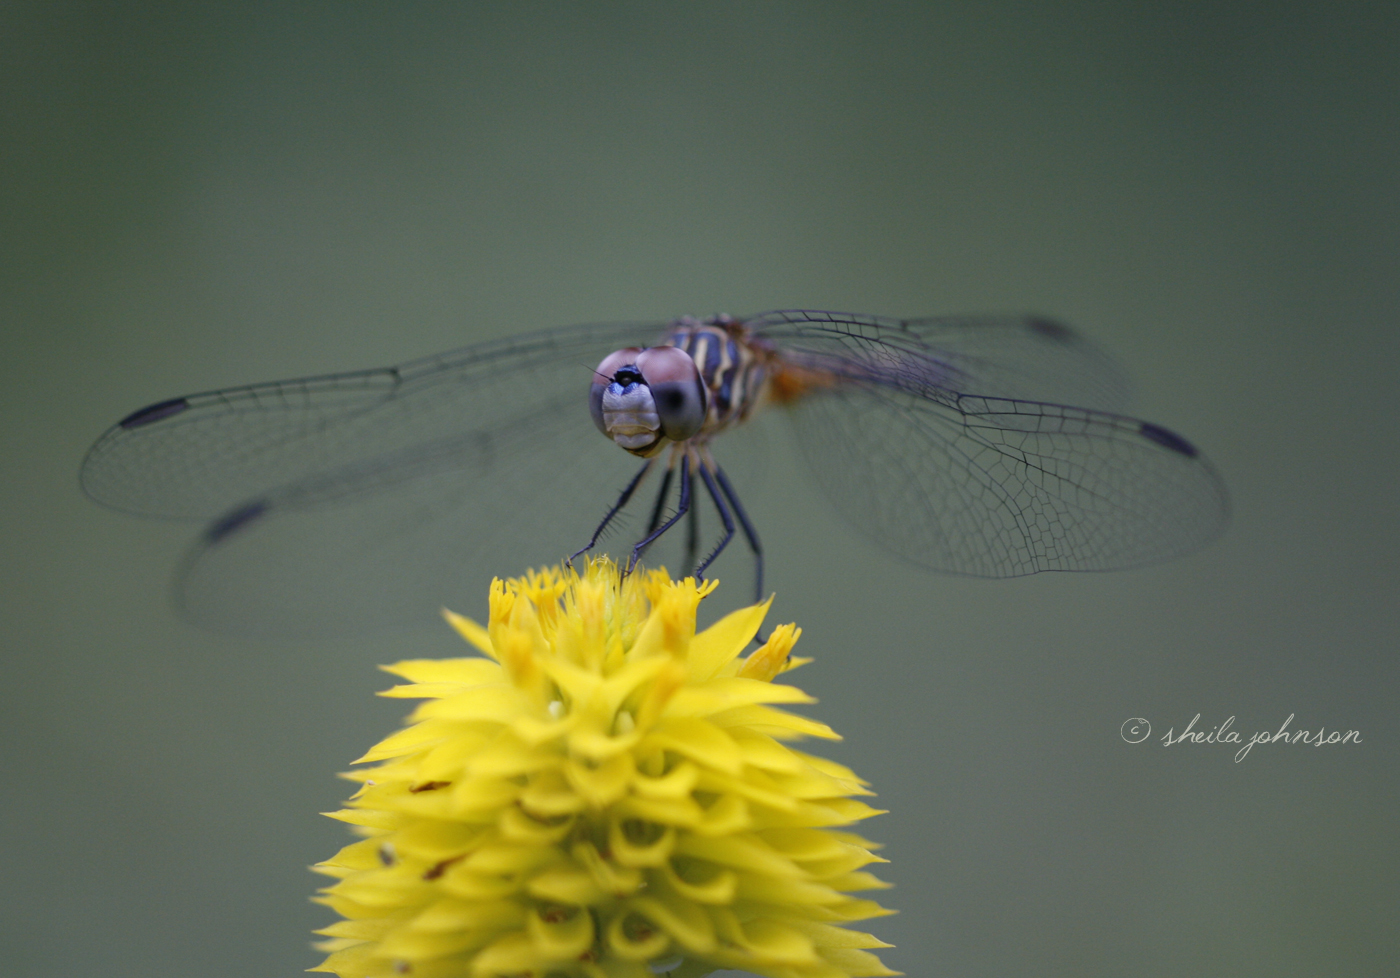 A Purple Roseate Skimmer Dragonfly Has His Own Little World, Just Like Horton.